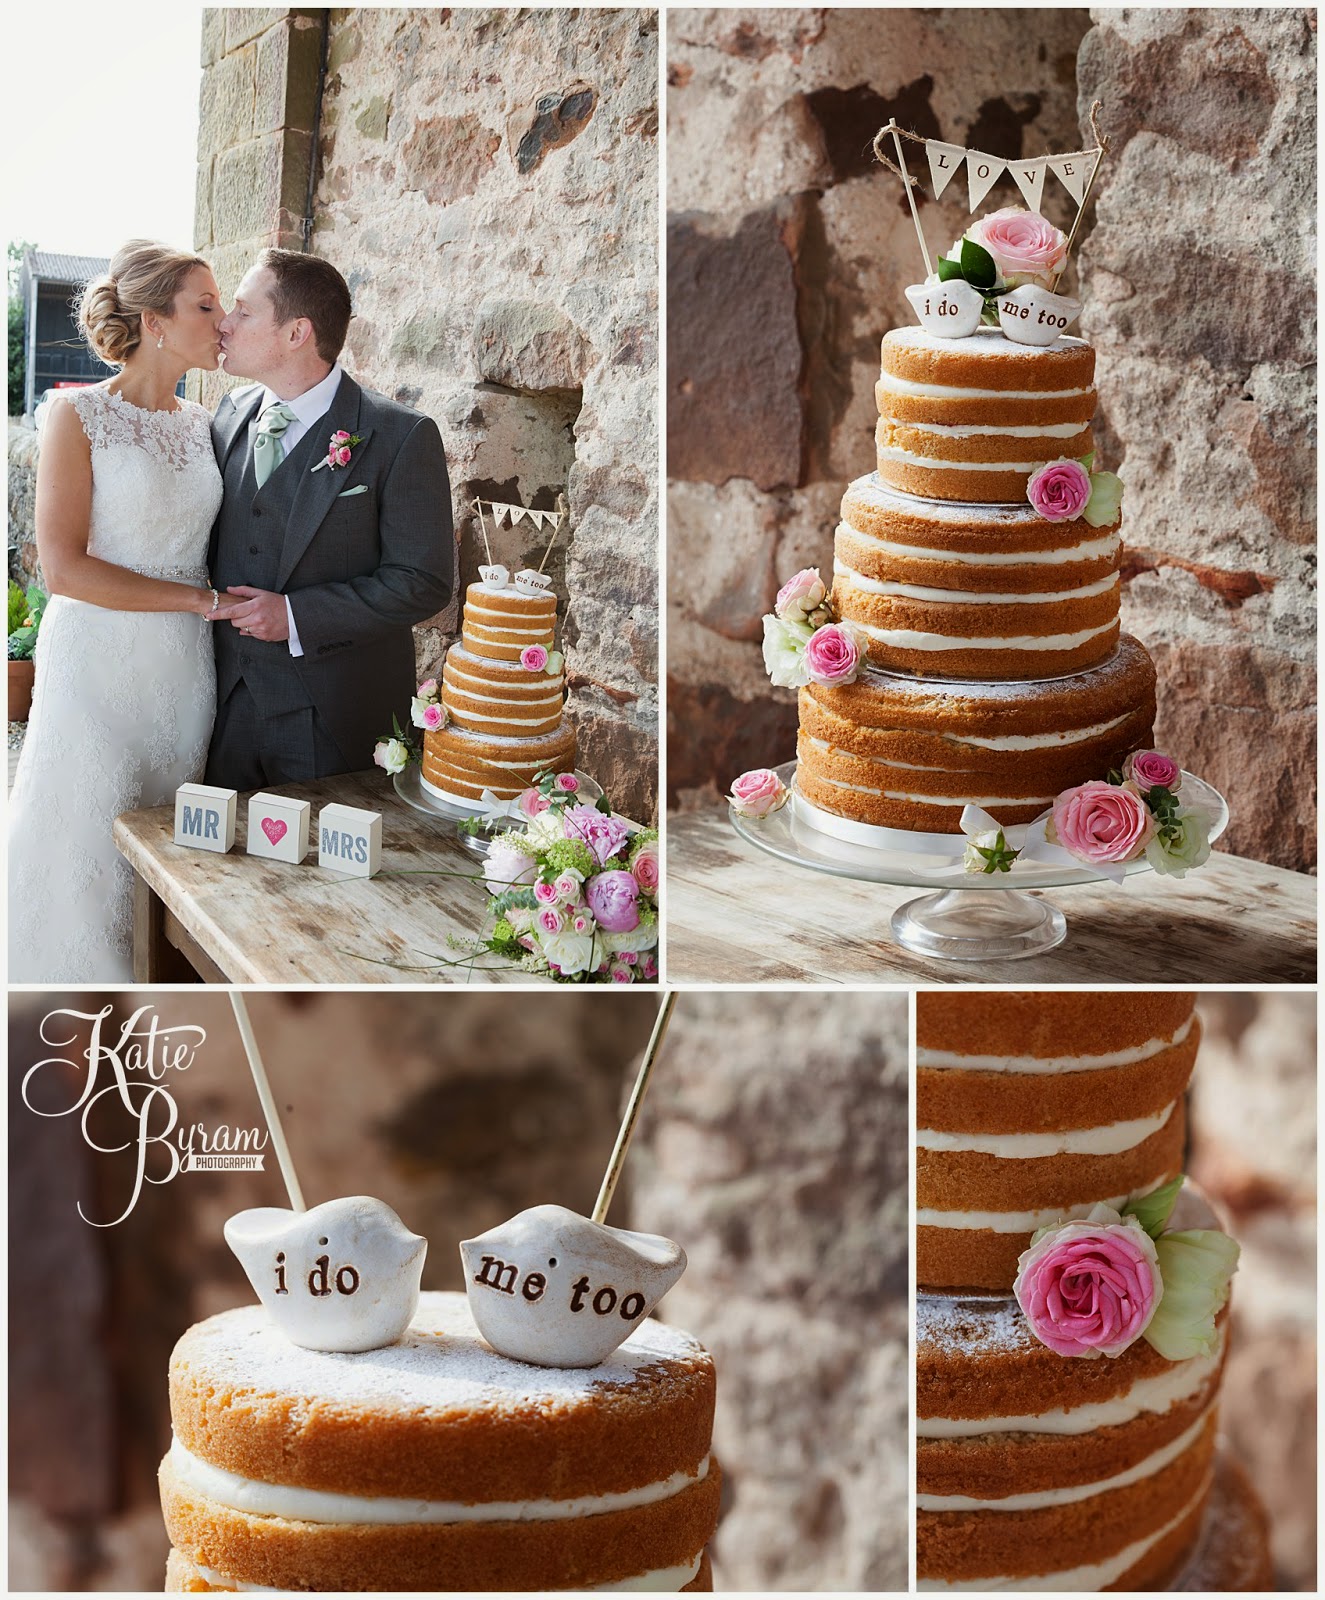 naked wedding cake, cakes by becky, cute cake toppers, high house farm brewery, healey barn, high house farm wedding, matfen wedding, matfen brewery, quirky wedding venue, northumberland, katie byram photography, hay bales wedding, bride and groom, farm wedding